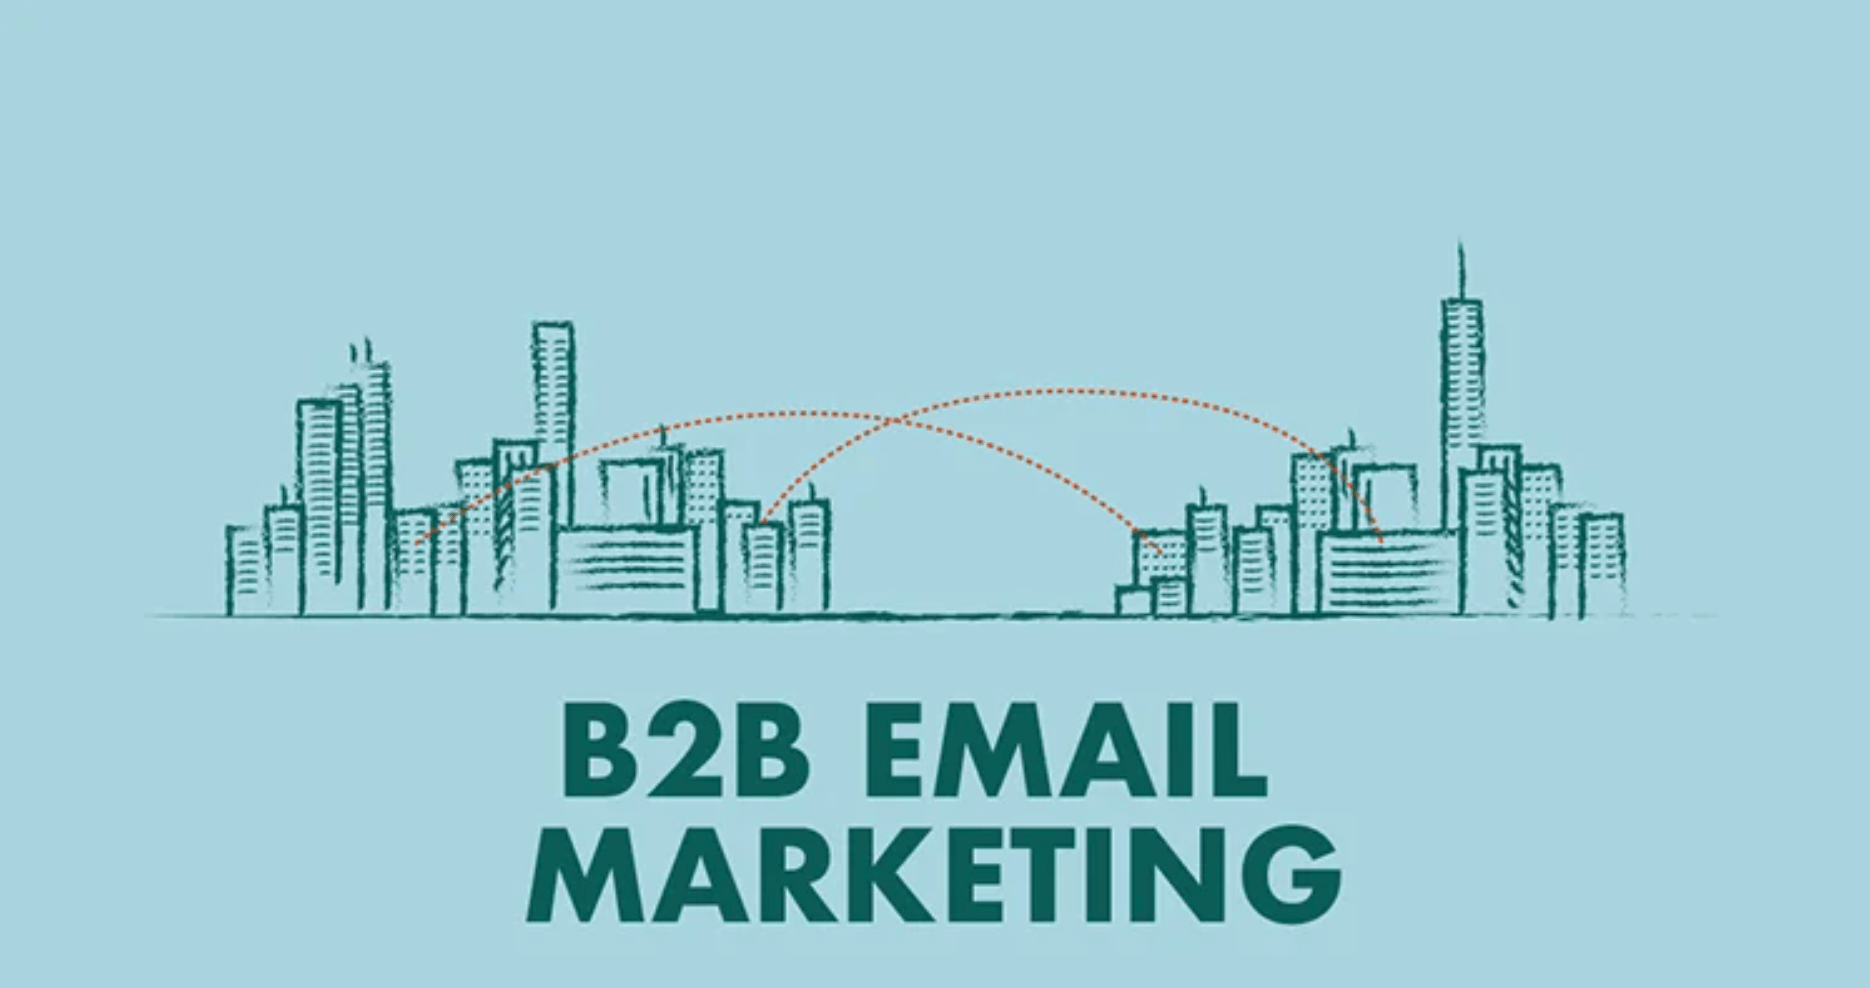 What are Some Essential Strategies for B2B Email Marketing in 2021